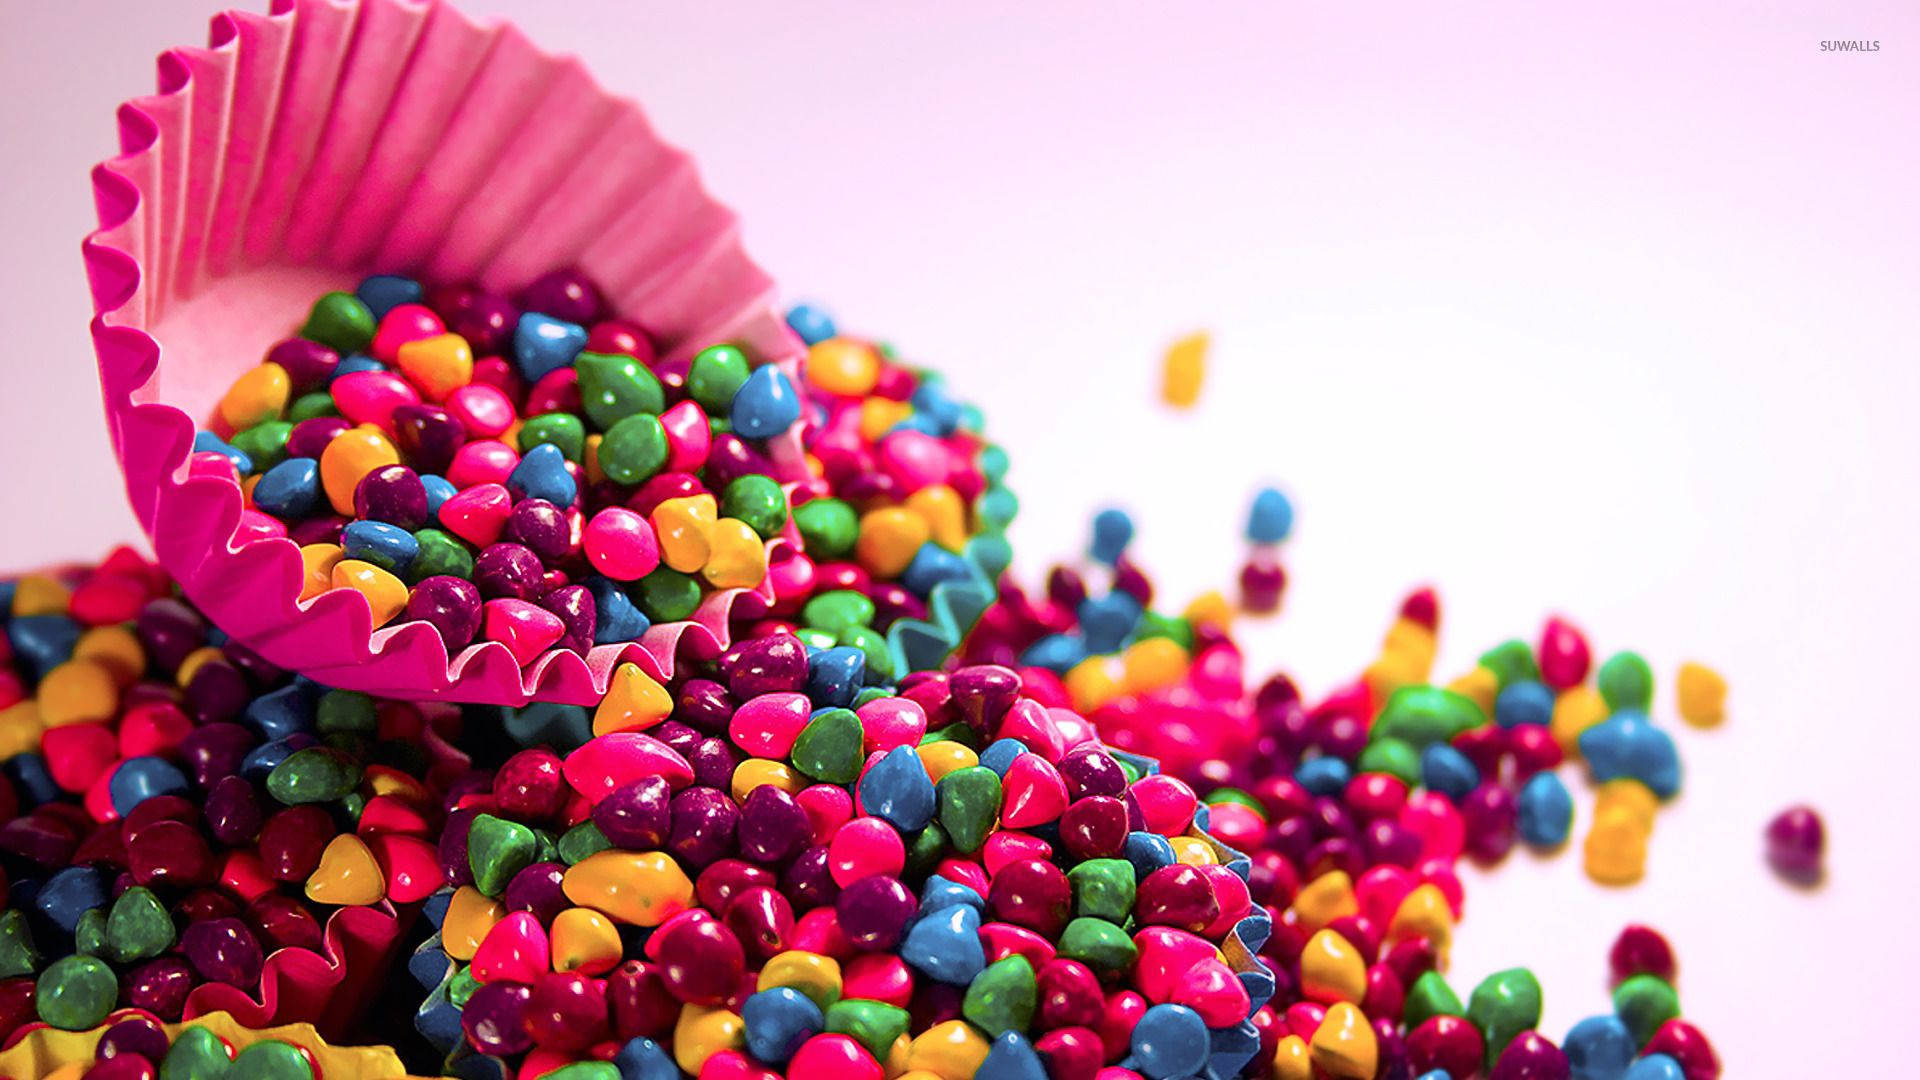 Colorful Round Candies Wallpaper